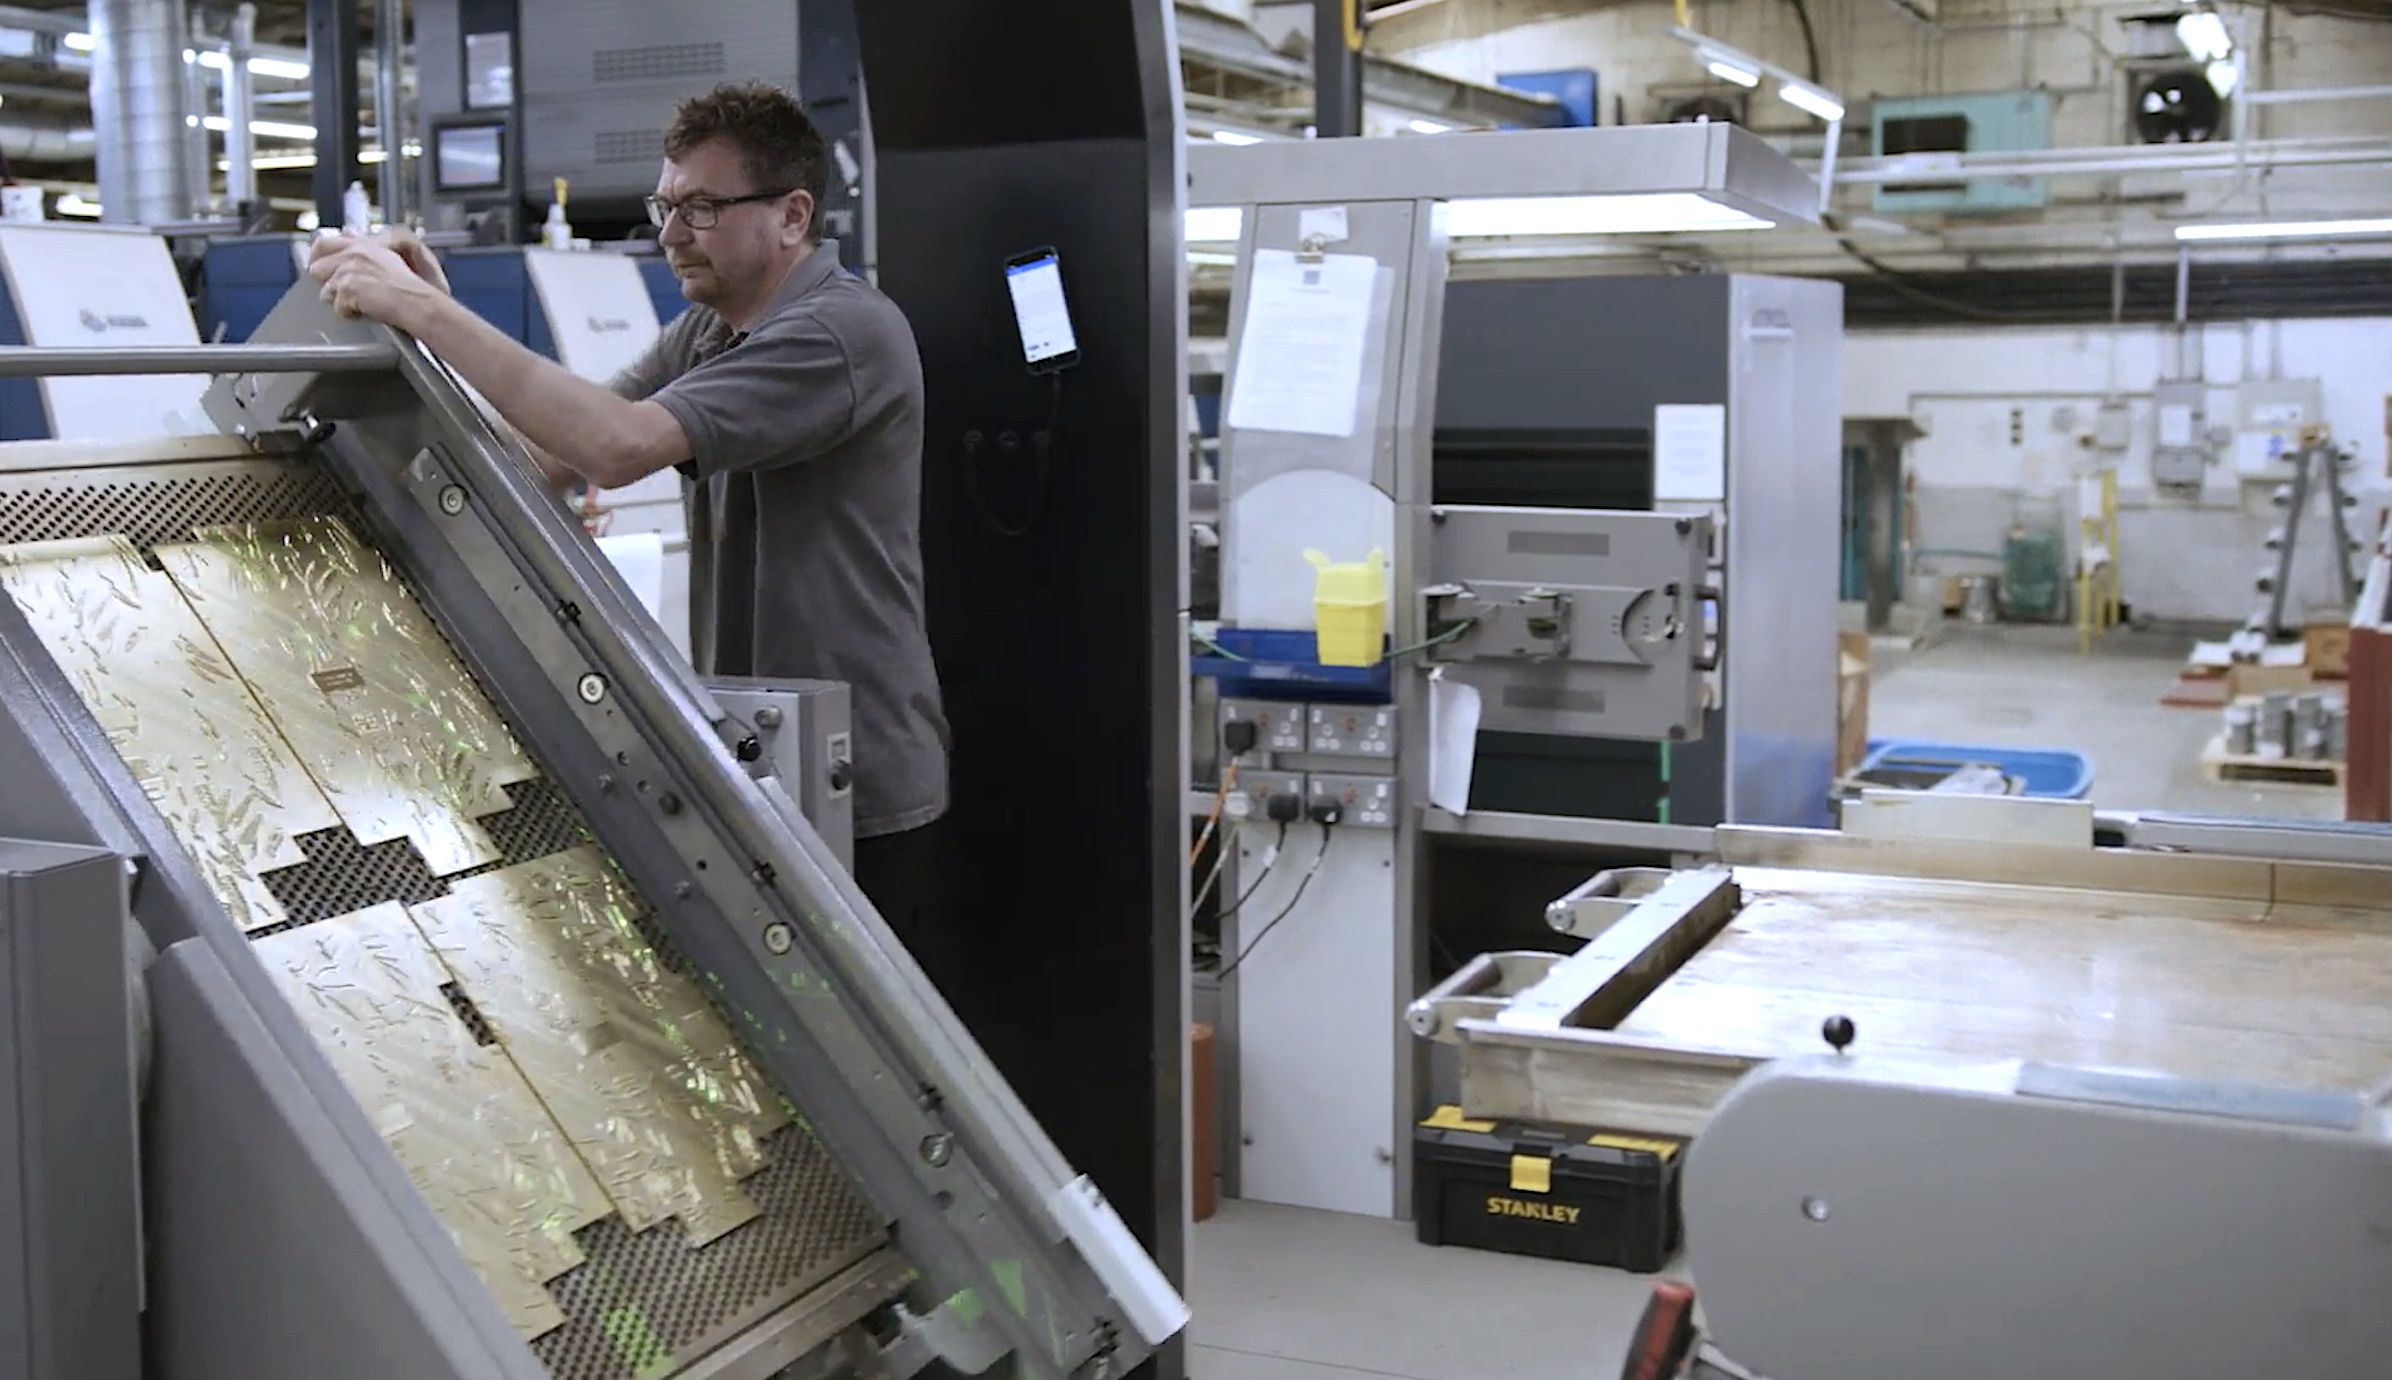 Beamglow installed the BOBST Digital Make Ready Tool for its MASTERFOIL